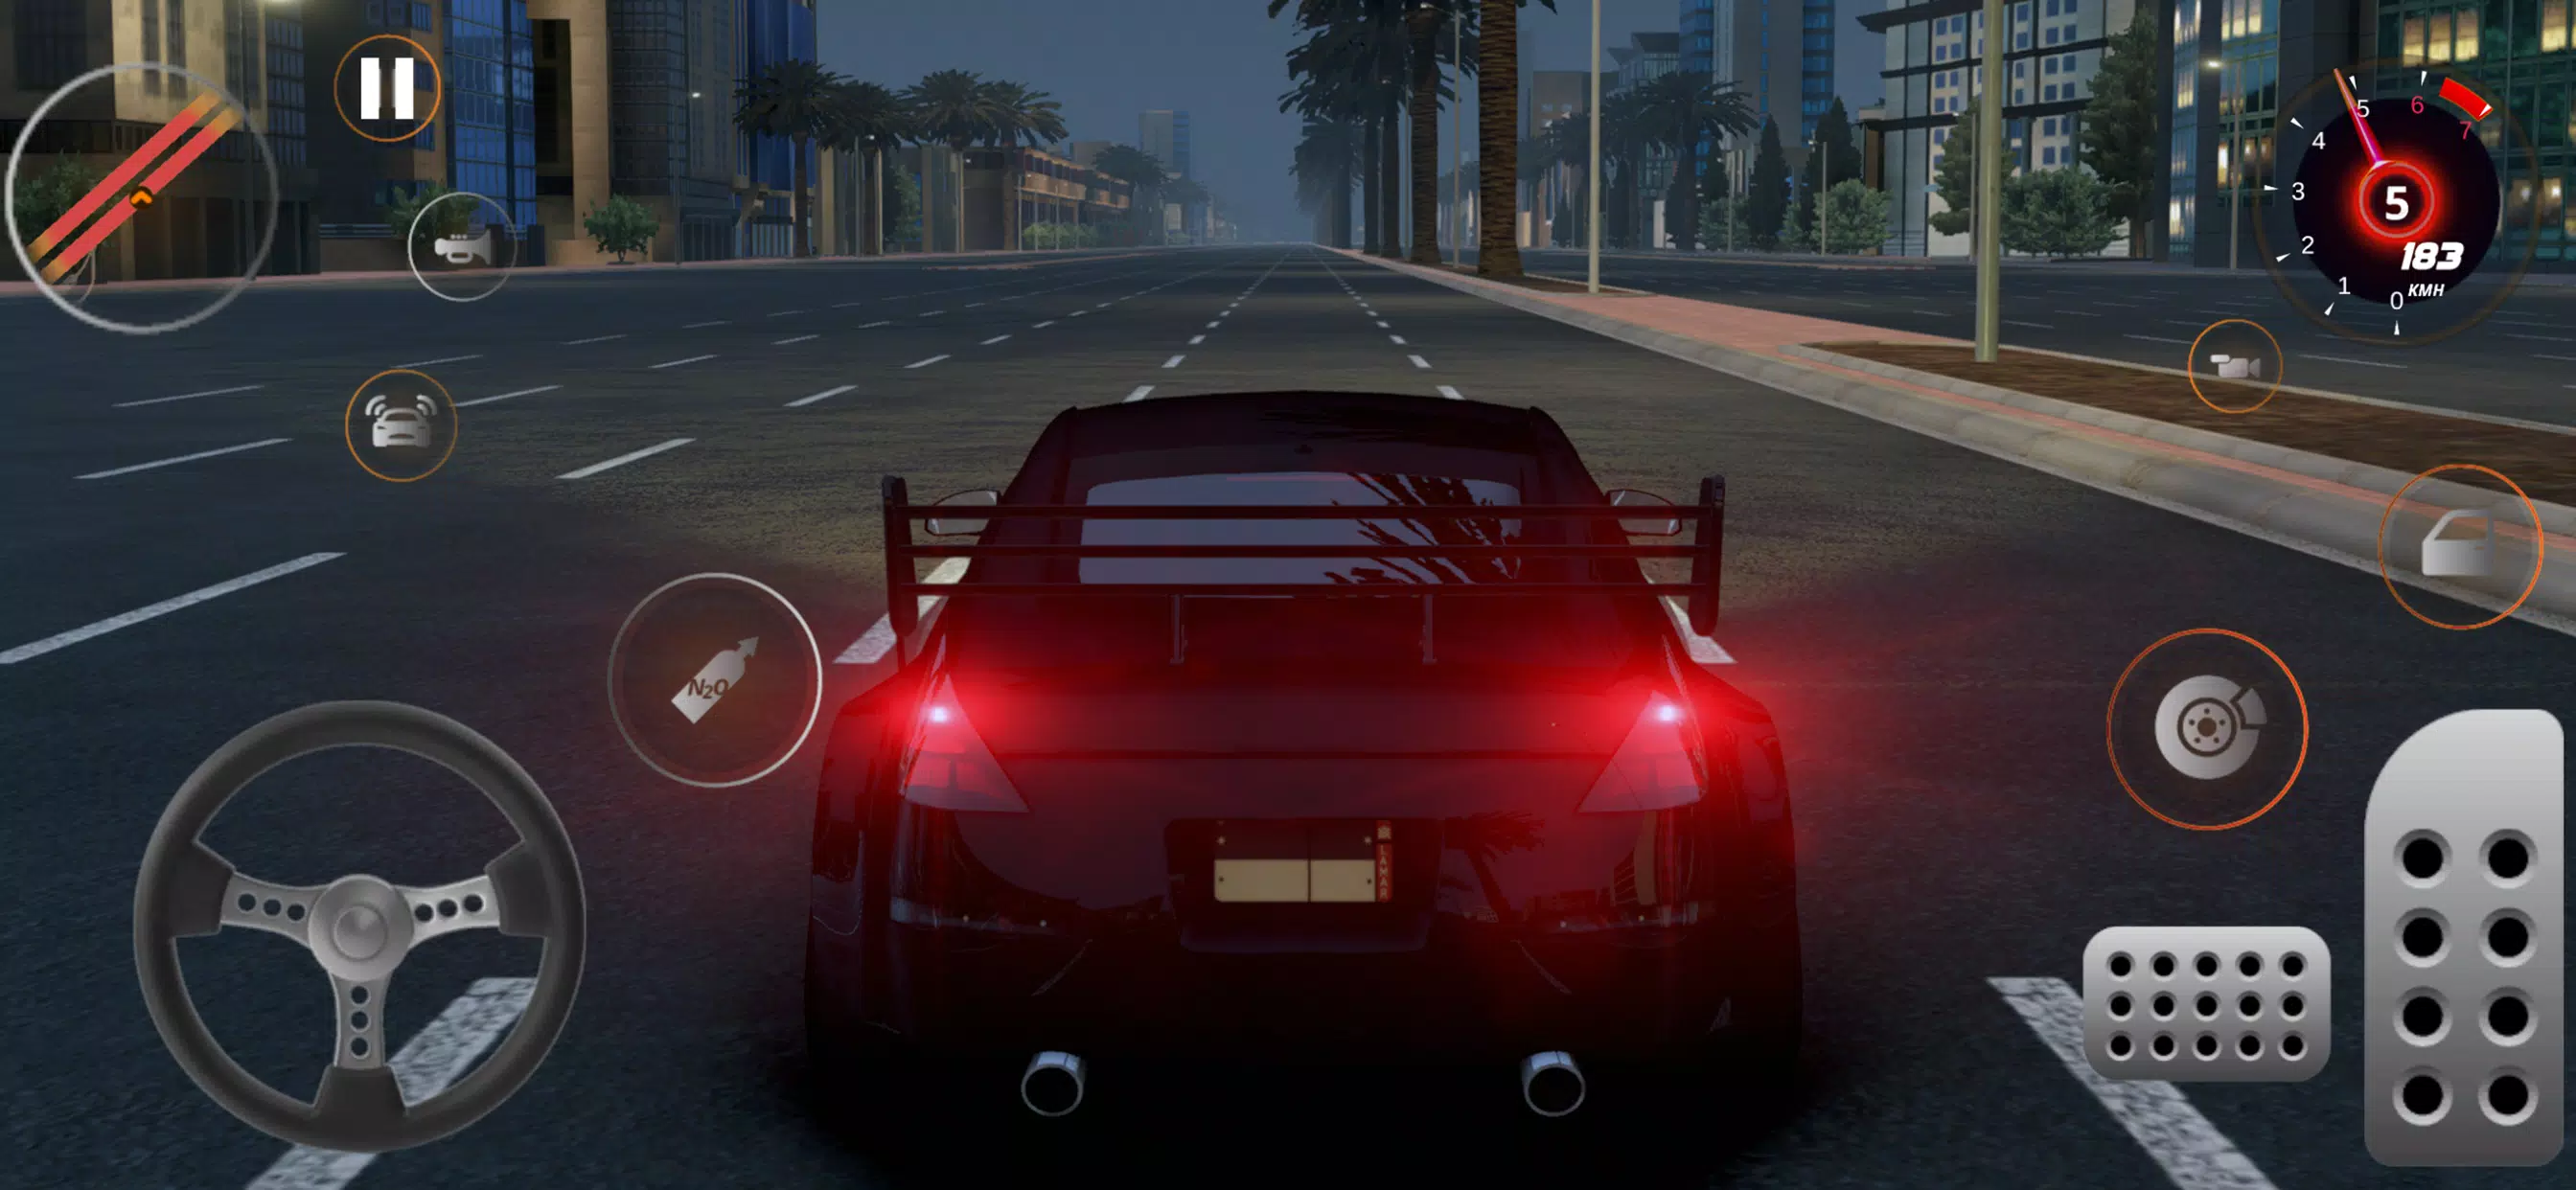 Drift for Life APK 1.2.32 Latest version for Android